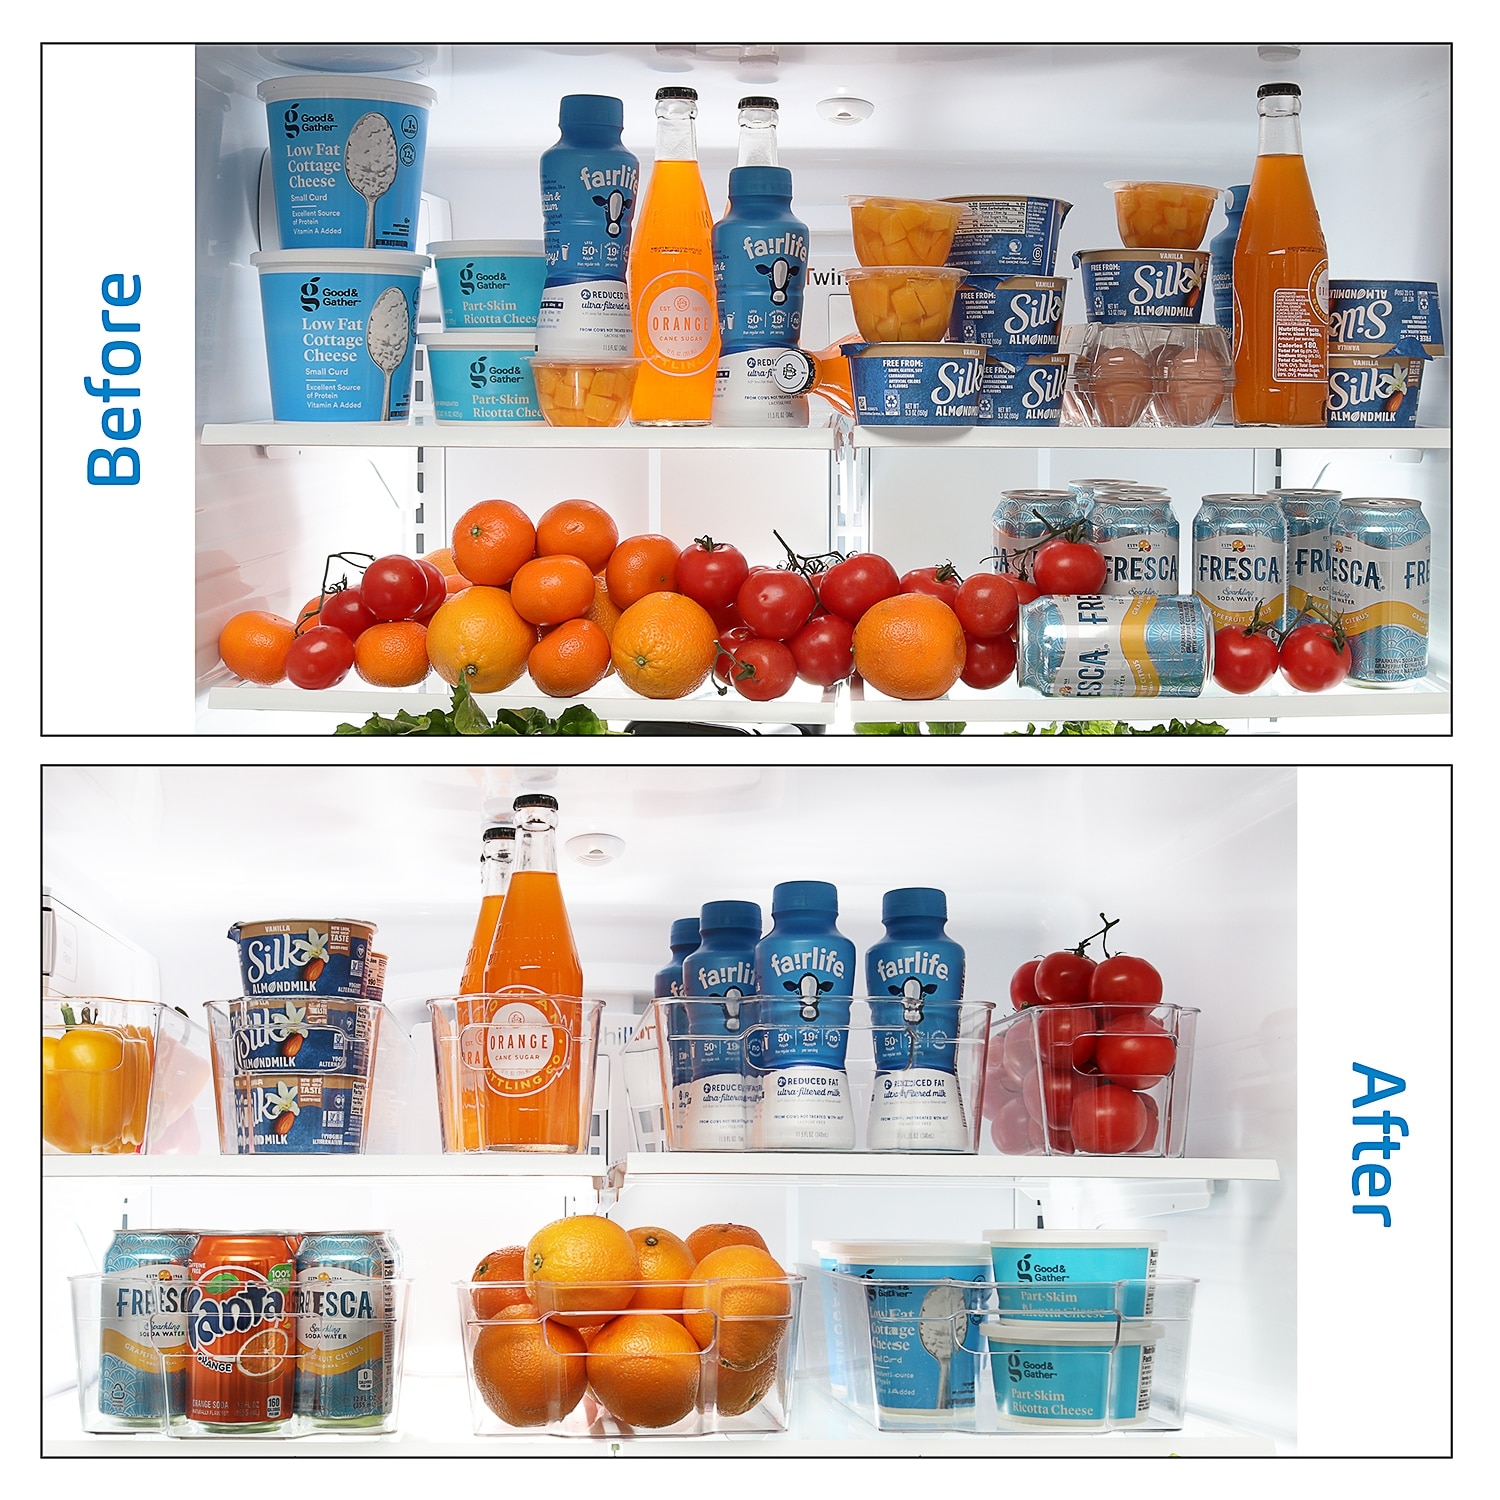 https://ak1.ostkcdn.com/images/products/is/images/direct/a65adc8b238e9d7671ead017cedc57d8b245e0af/StorageBud-Refrigerator-Organizer-Bins---Stackable-Storage-Containers.jpg